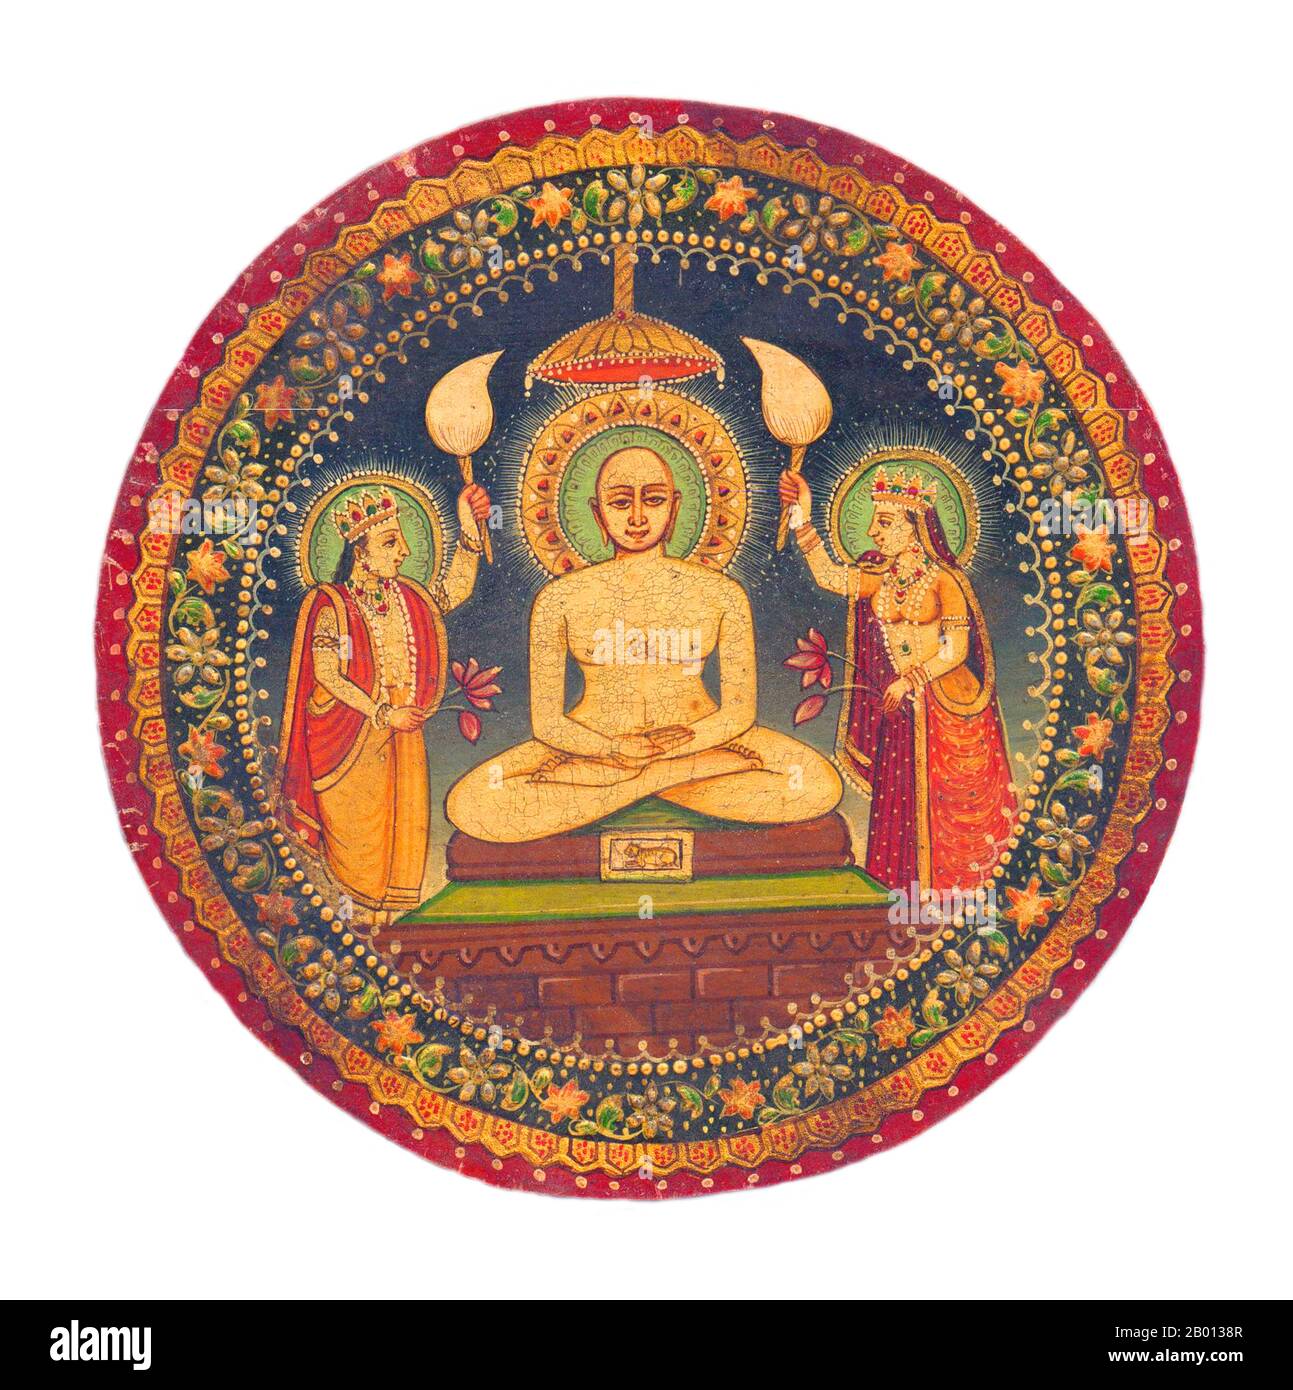 India: Mahavira, the 24th Tirthankara of Jainism (d. 527 BCE). Painting from Rajasthan, c. 1900.  Mahavira, meaning 'Great Hero', traditionally 599–527 BCE, is the name most commonly used to refer to the Indian sage Vardhamana who established what are today considered to be the central tenets of Jainism. According to Jain tradition, he was the 24th and the last Tirthankara. In Tamil, he is referred to as Arugan or Arugadevan. He is also known in texts as Vira or Viraprabhu, Sanmati, Ativira,and Gnatputra. In the Buddhist Pali Canon, he is referred to as Nigantha Nātaputta. Stock Photo